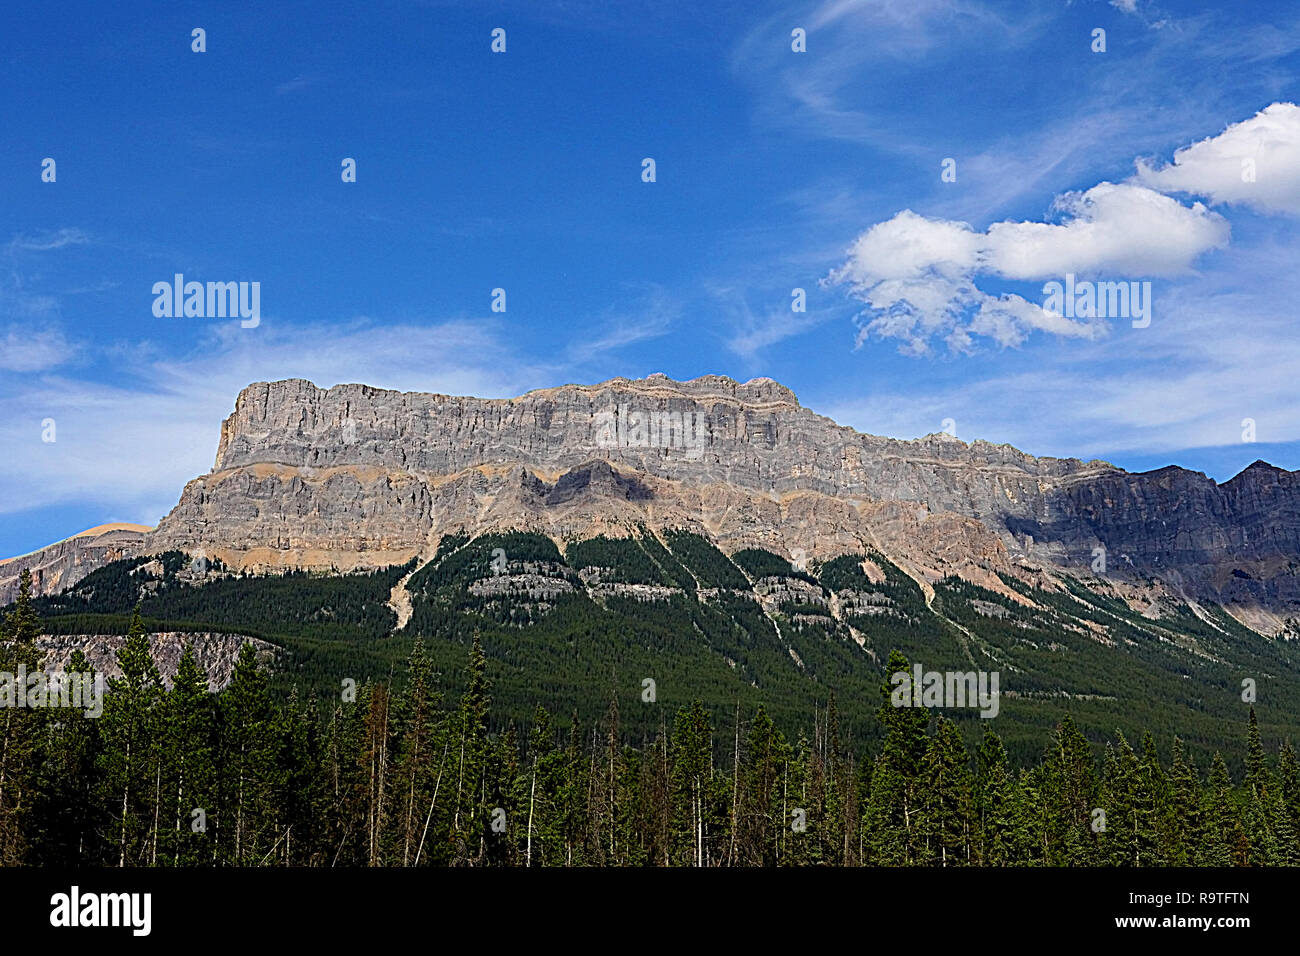 Castle Mountain is located along the TrasnsCanada Highway in Banff National Park,Alberta, Canada Stock Photo